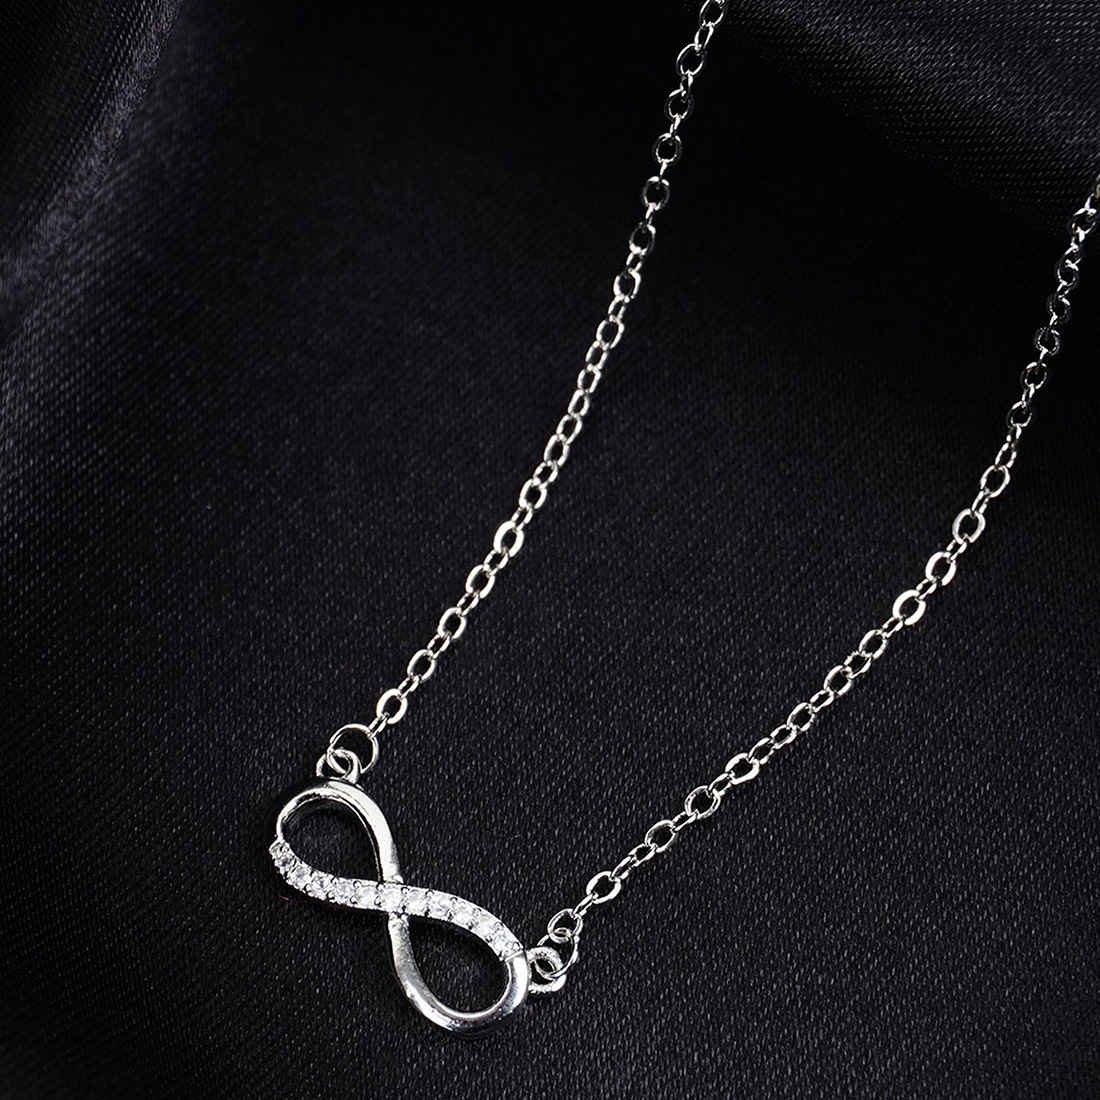 Silver Toned Delicate Crystal Infinity Necklace